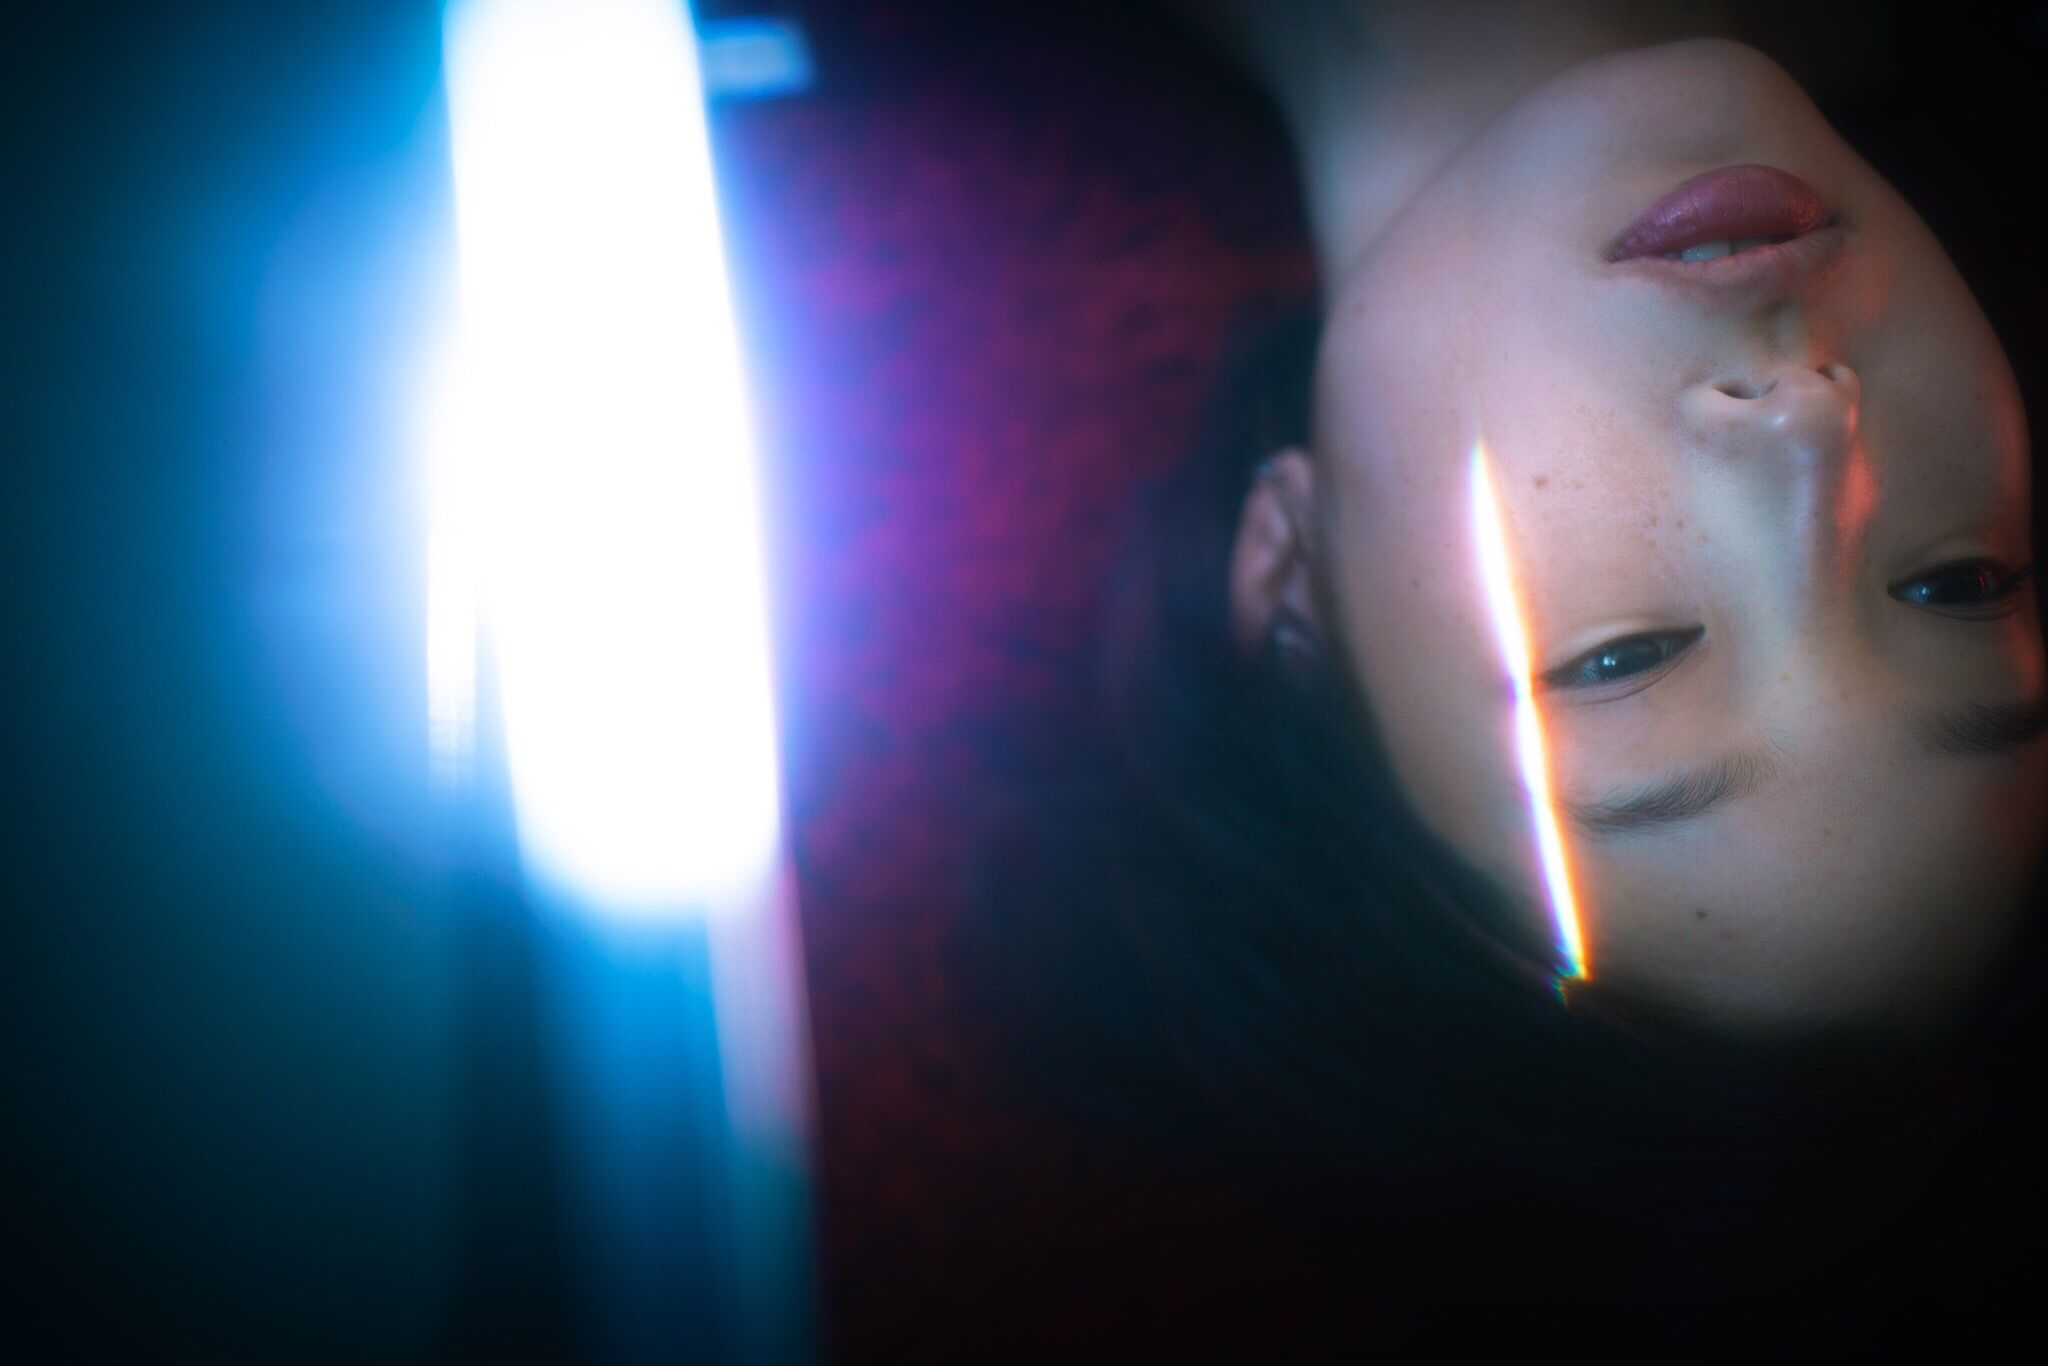 headshot, young adult, indoors, looking at camera, young women, person, human face, looking, lens flare, sun, contemplation, focus on foreground, bright, darkroom